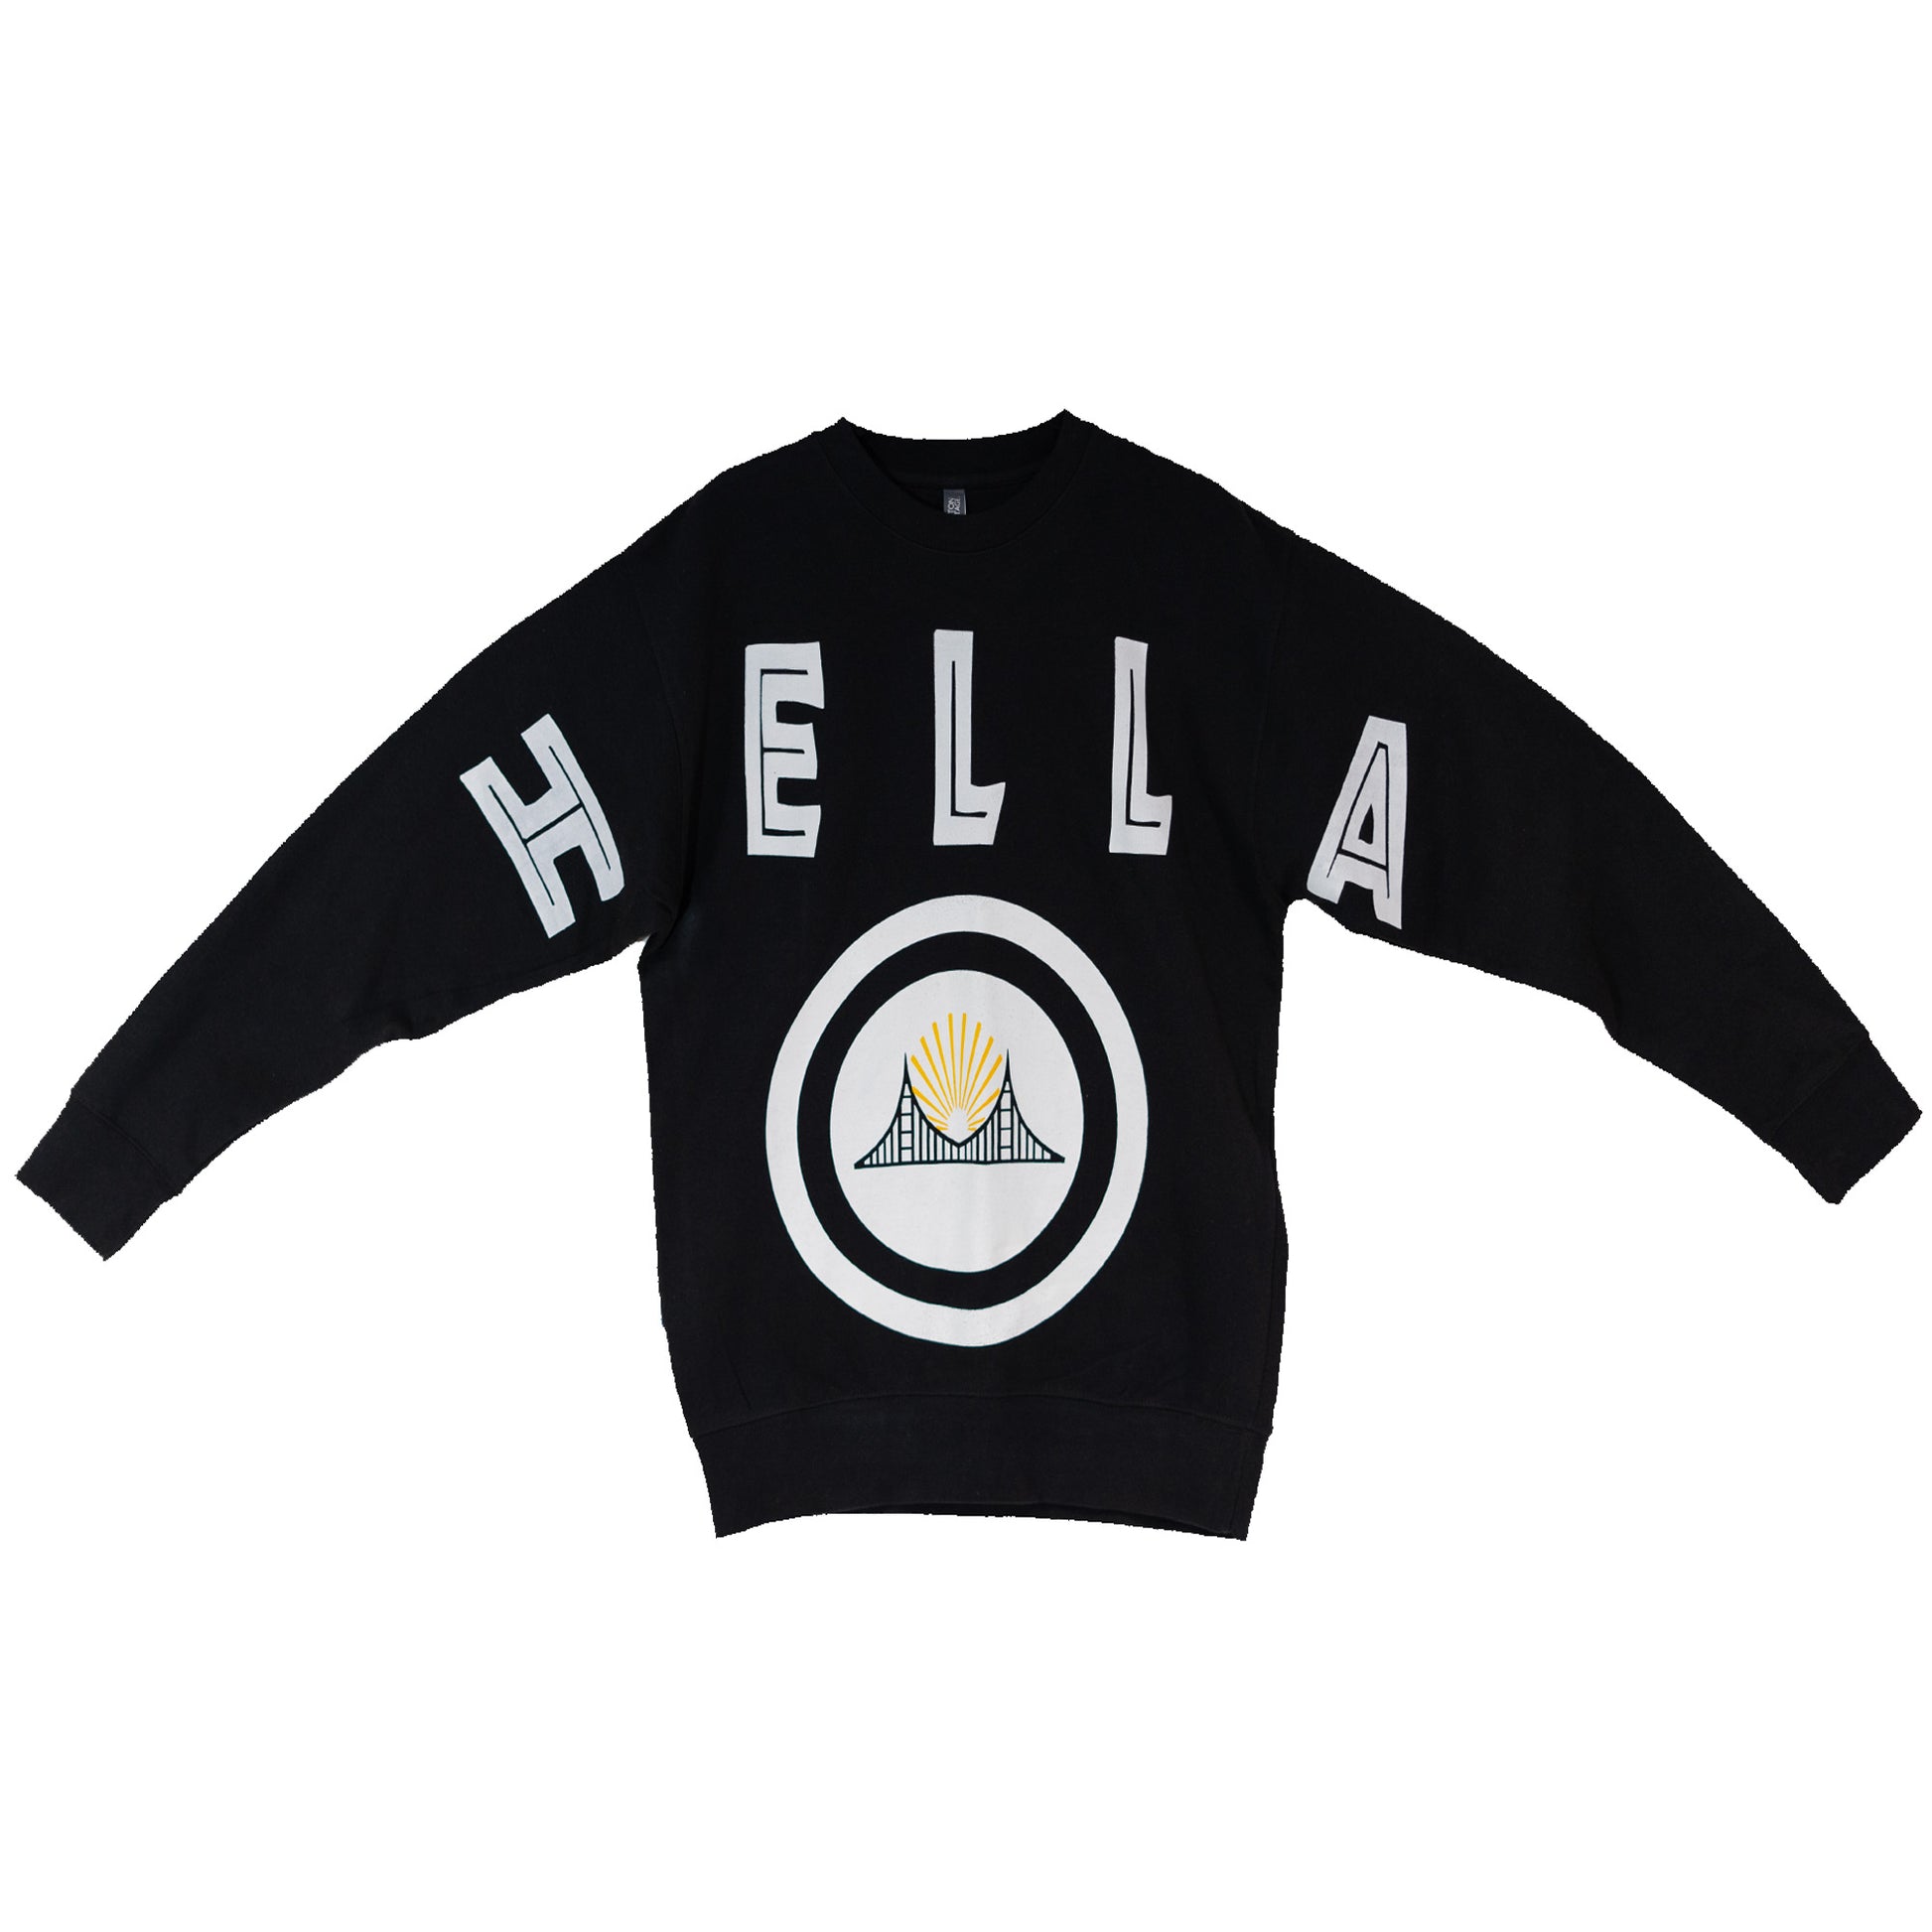 The word HELLA is spelled out across the top of this black crewneck sweatshirt from the right shoulder to the left shoulder. The middle of the crewneck has a large circle logo that features the silhouette of the Bay Bridge. 